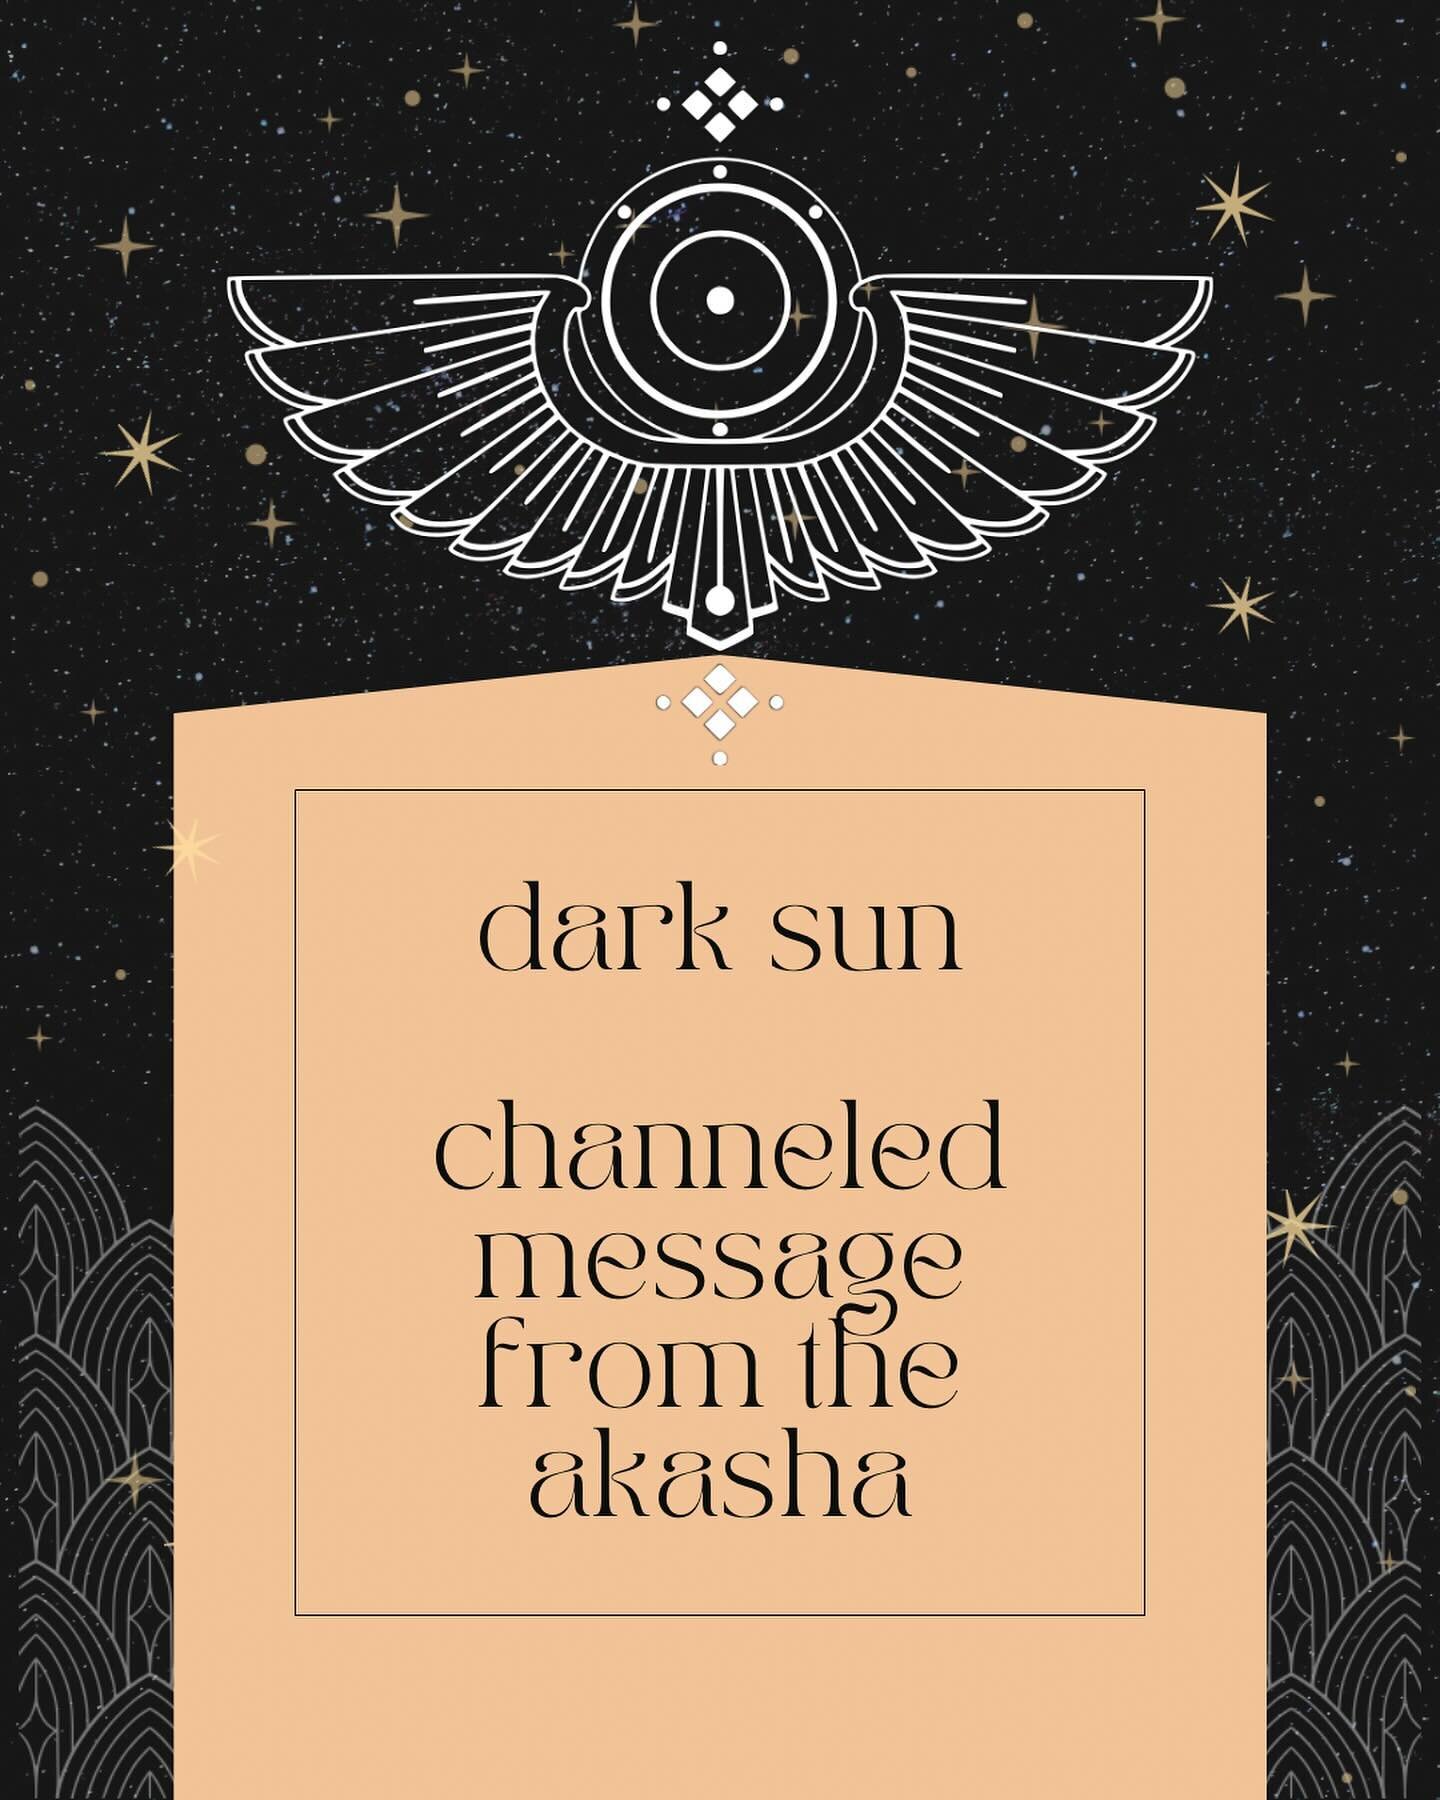 ⚫️☀️DARK SUN ☀️ ⚫️

A channeled message from the Akasha. 🔮✨

Yesterday, I opened the records after a few days of not opening them. The guides began giving me information that was clearly not only for me&mdash;it was meant for me to share with my aud